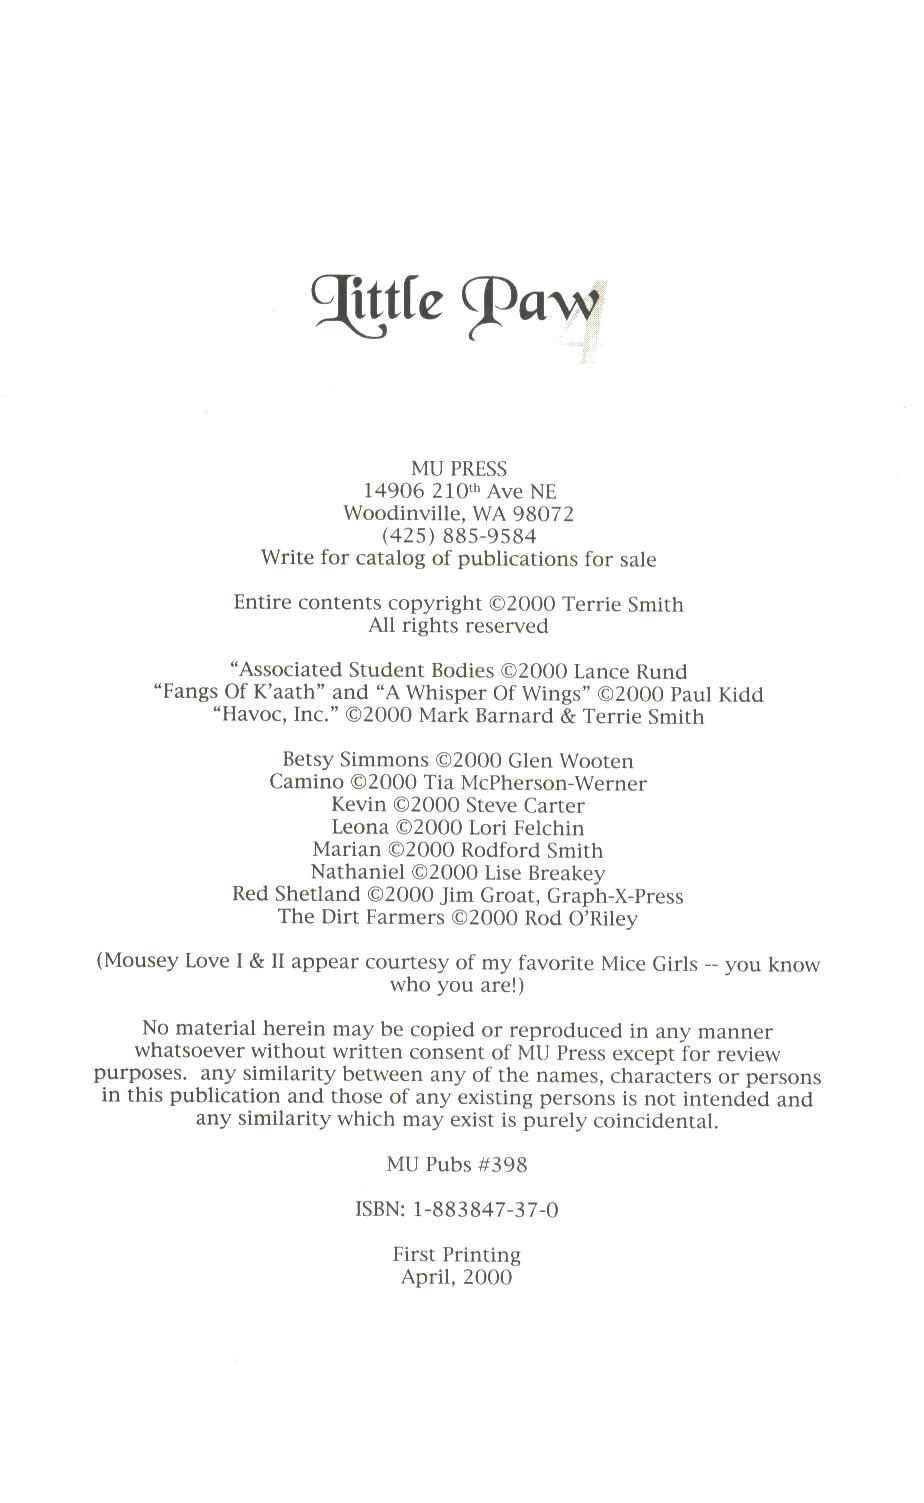 [Terrie Smith] Little Paw #4 